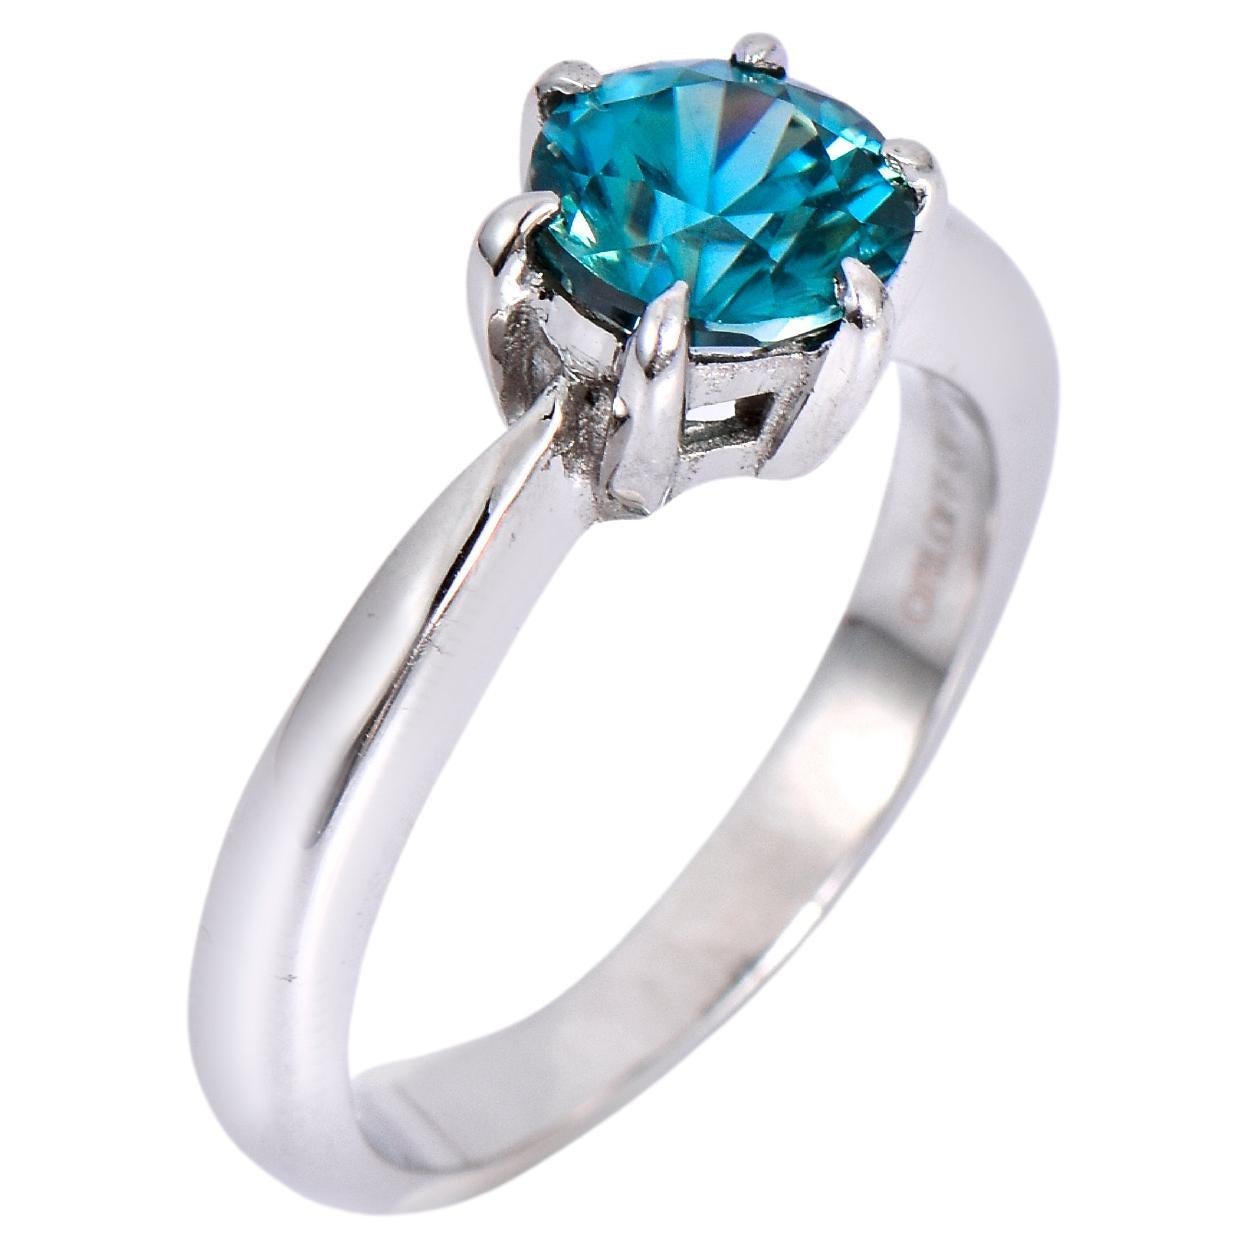 Orloff of Denmark, 1.46 ct Natural Blue Zircon Ring in 925 Sterling Silver